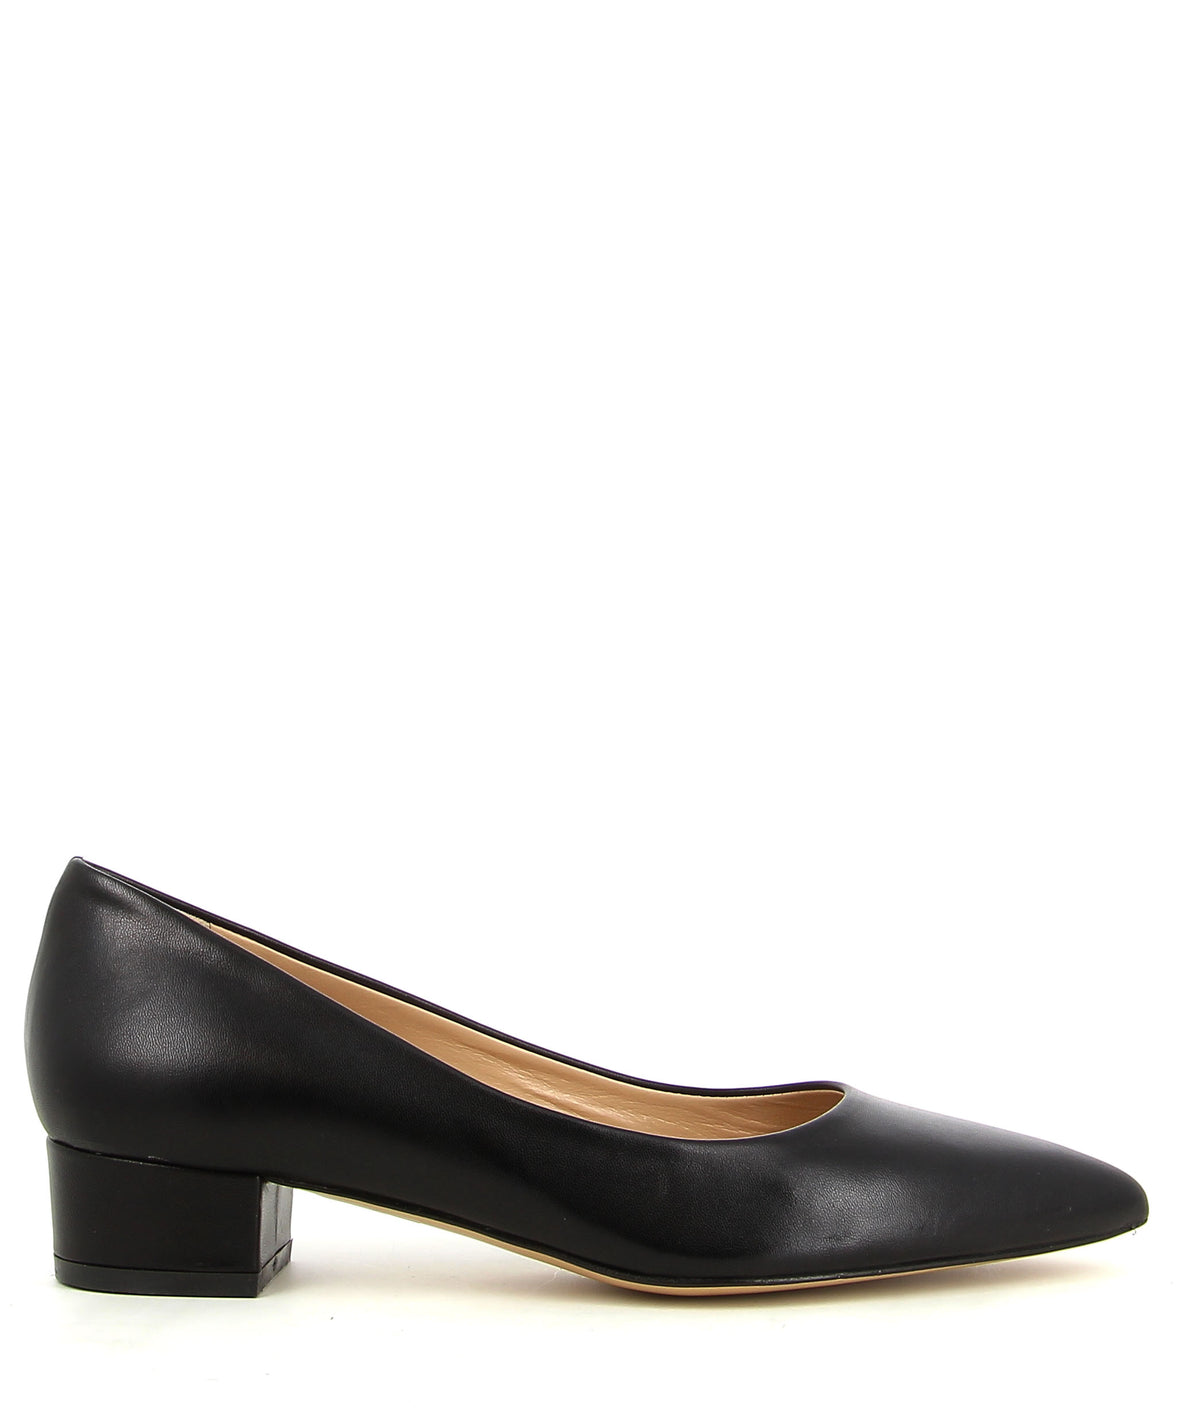 black leather court shoes low heel